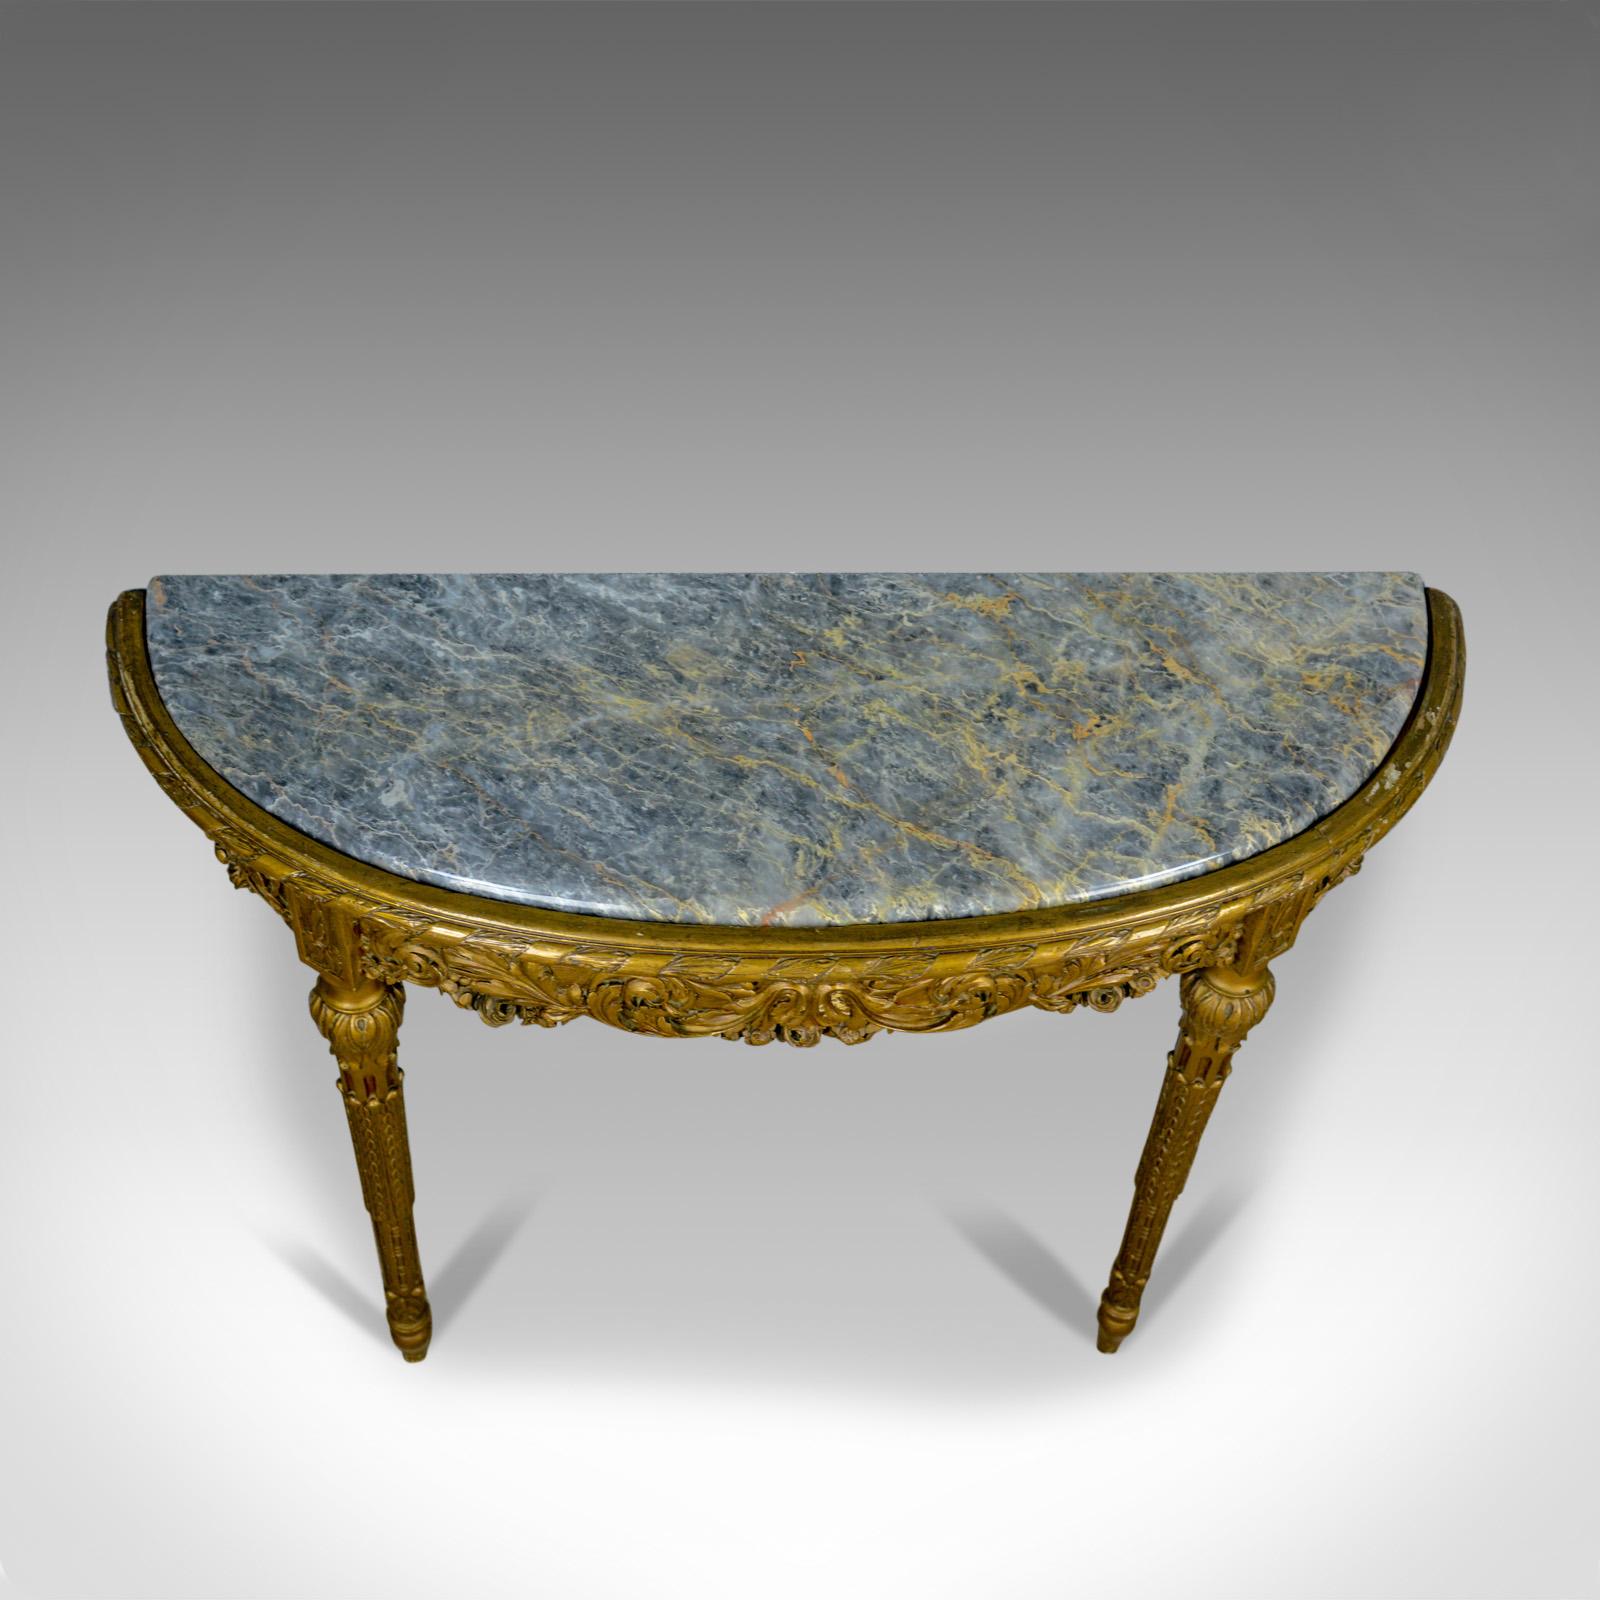 Neoclassical Revival French Antique Console Table, Giltwood, Marble, Classical Revival, Pier